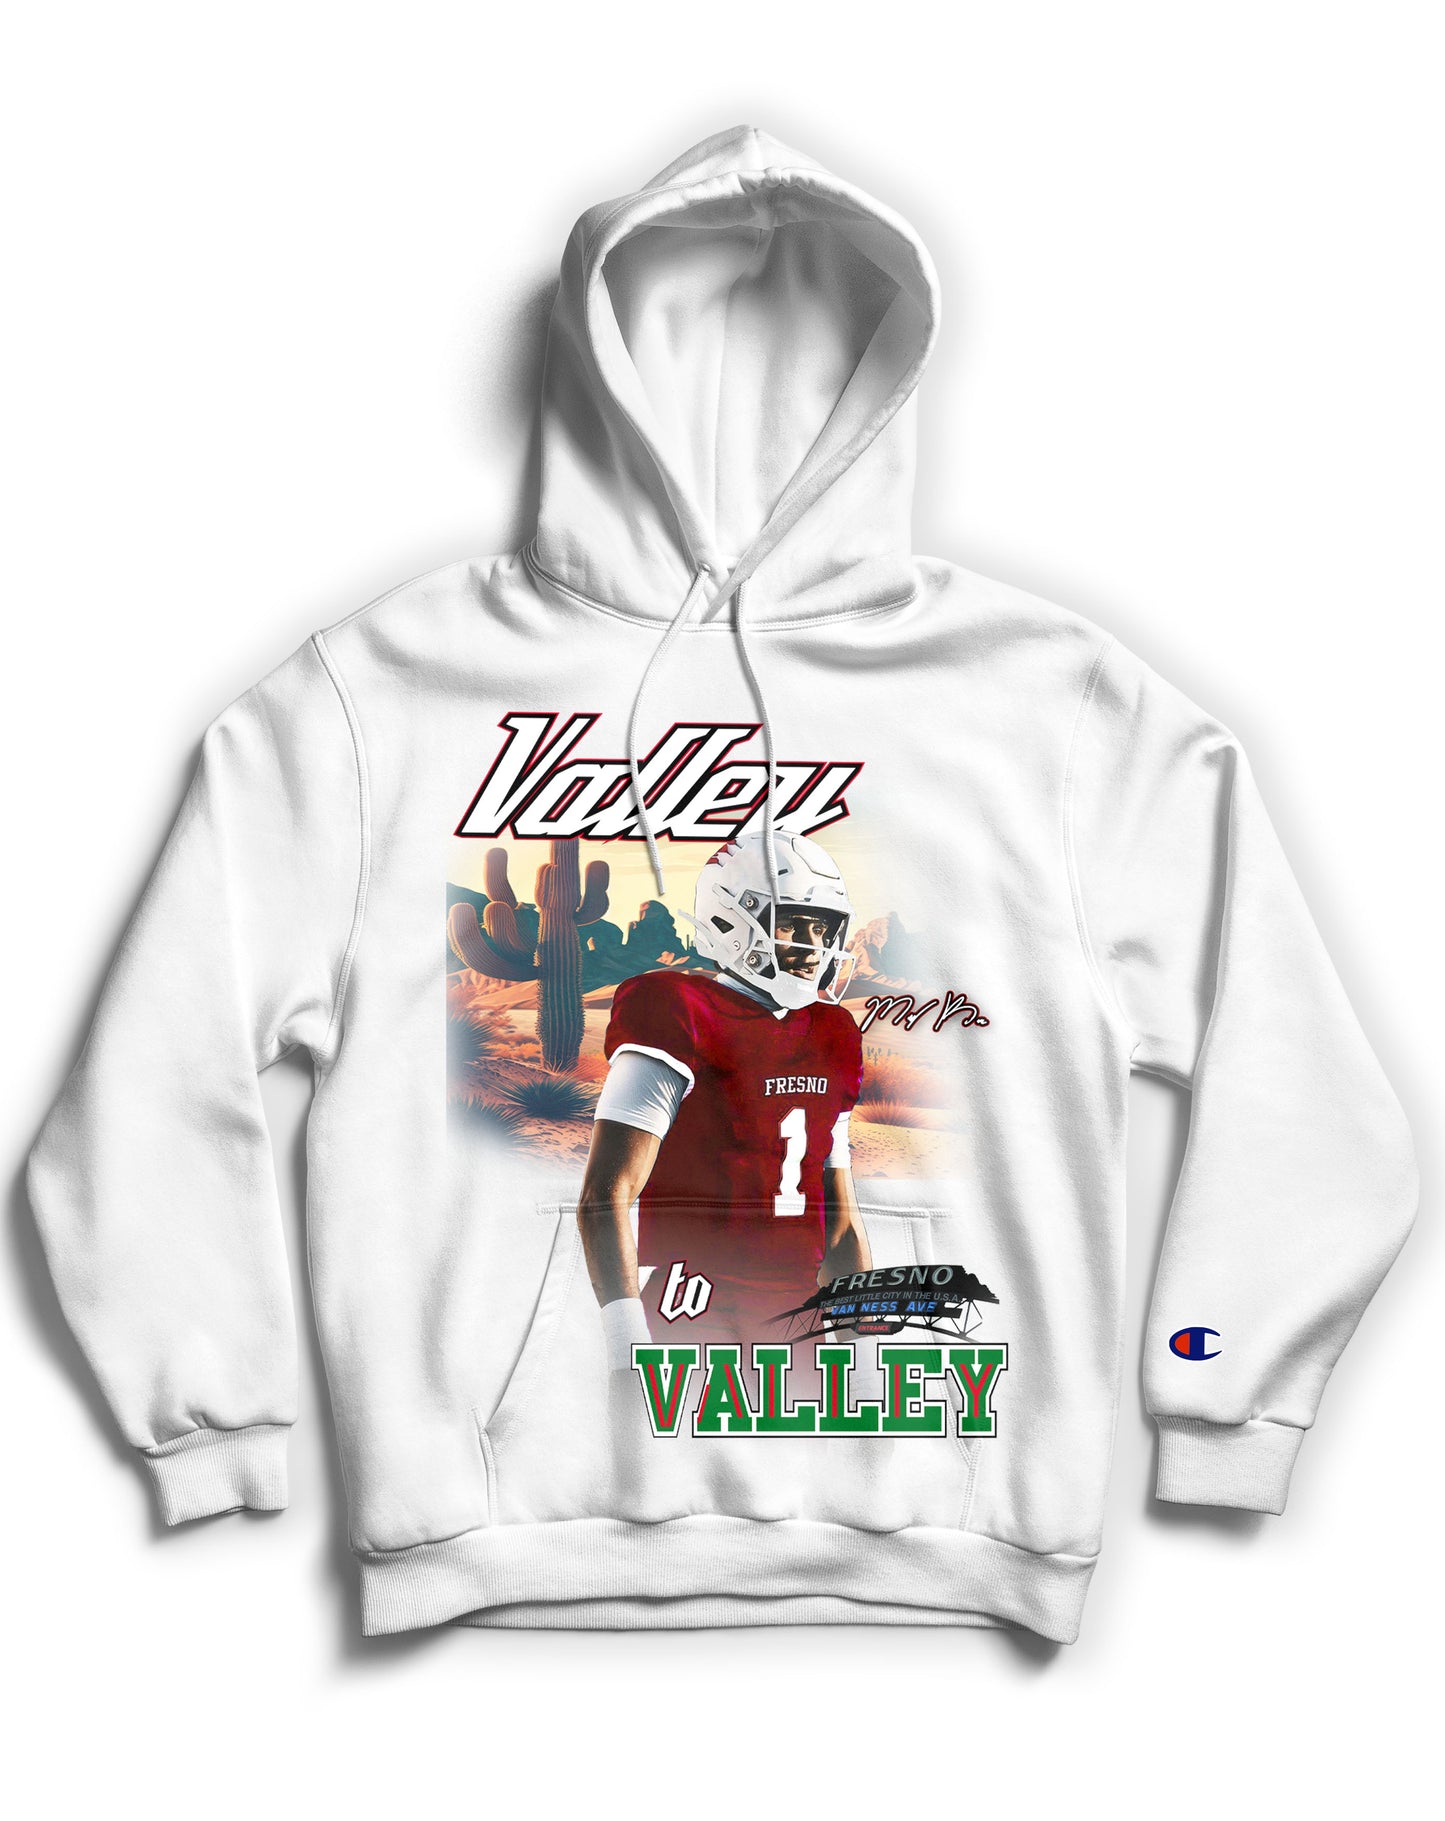 Mikey Keene “Valley to Valley” Tribute Hoodie *LIMITED EDITION* (Black & White)